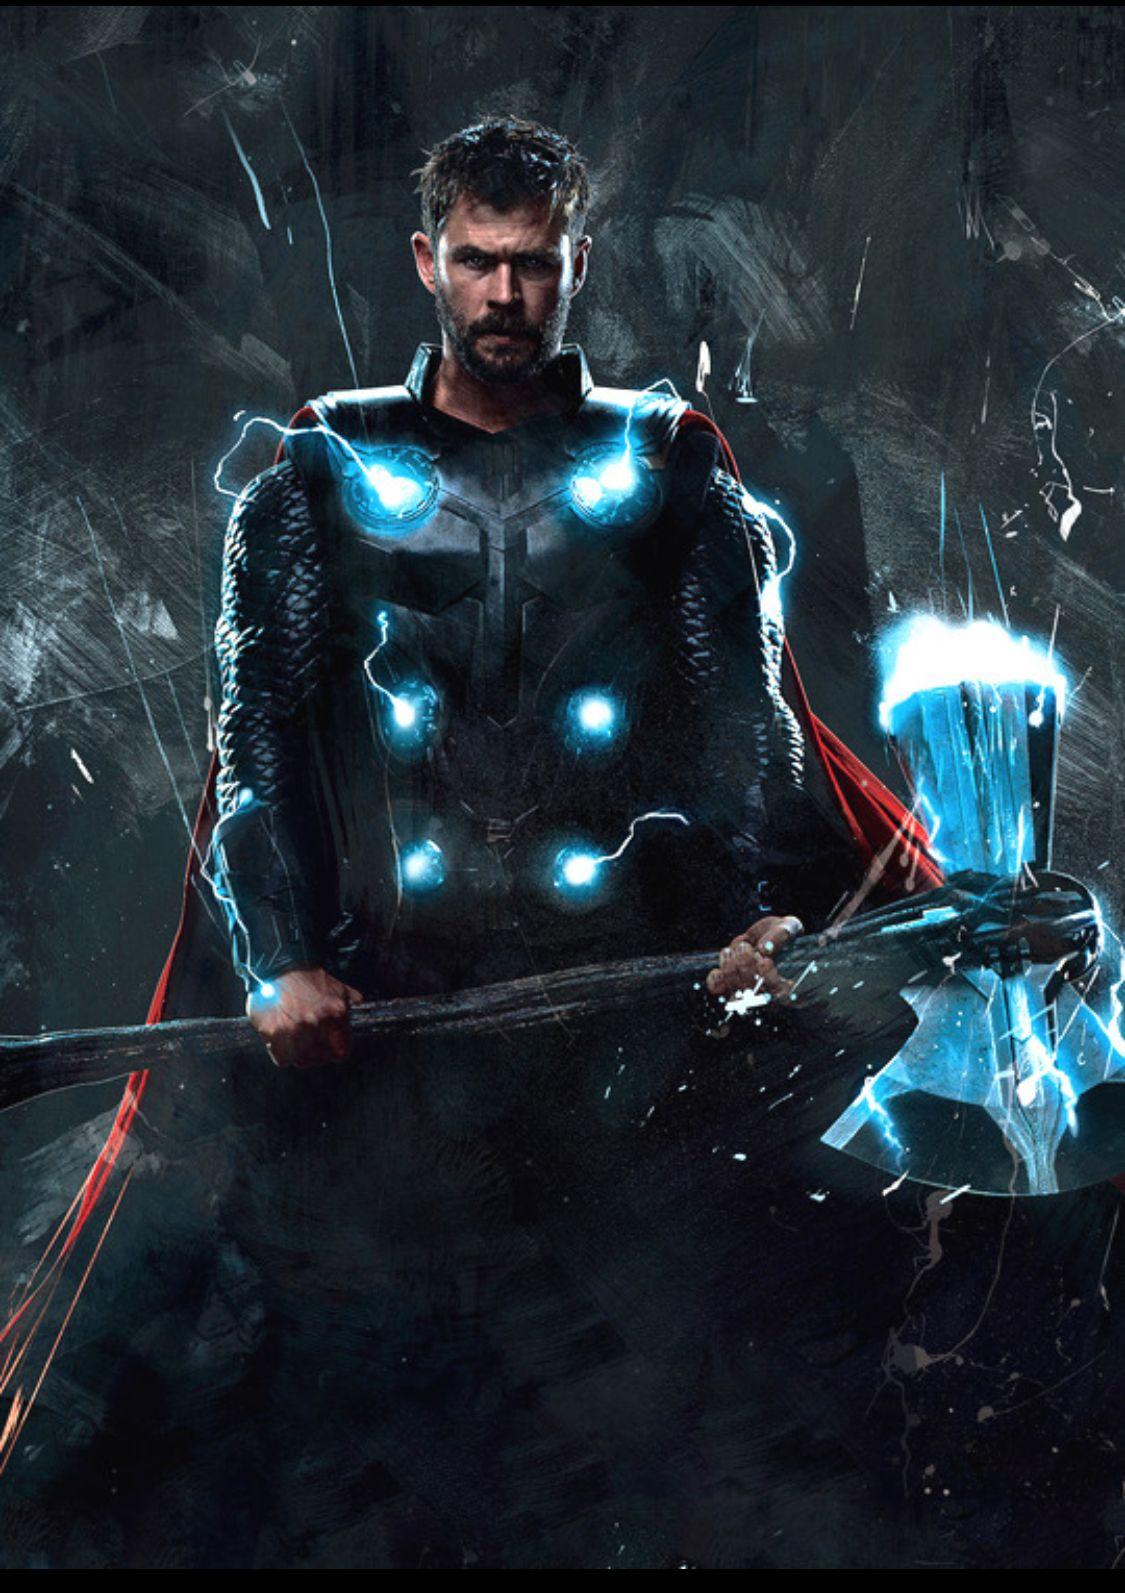 Thor.. Stormbreaker... Just wow